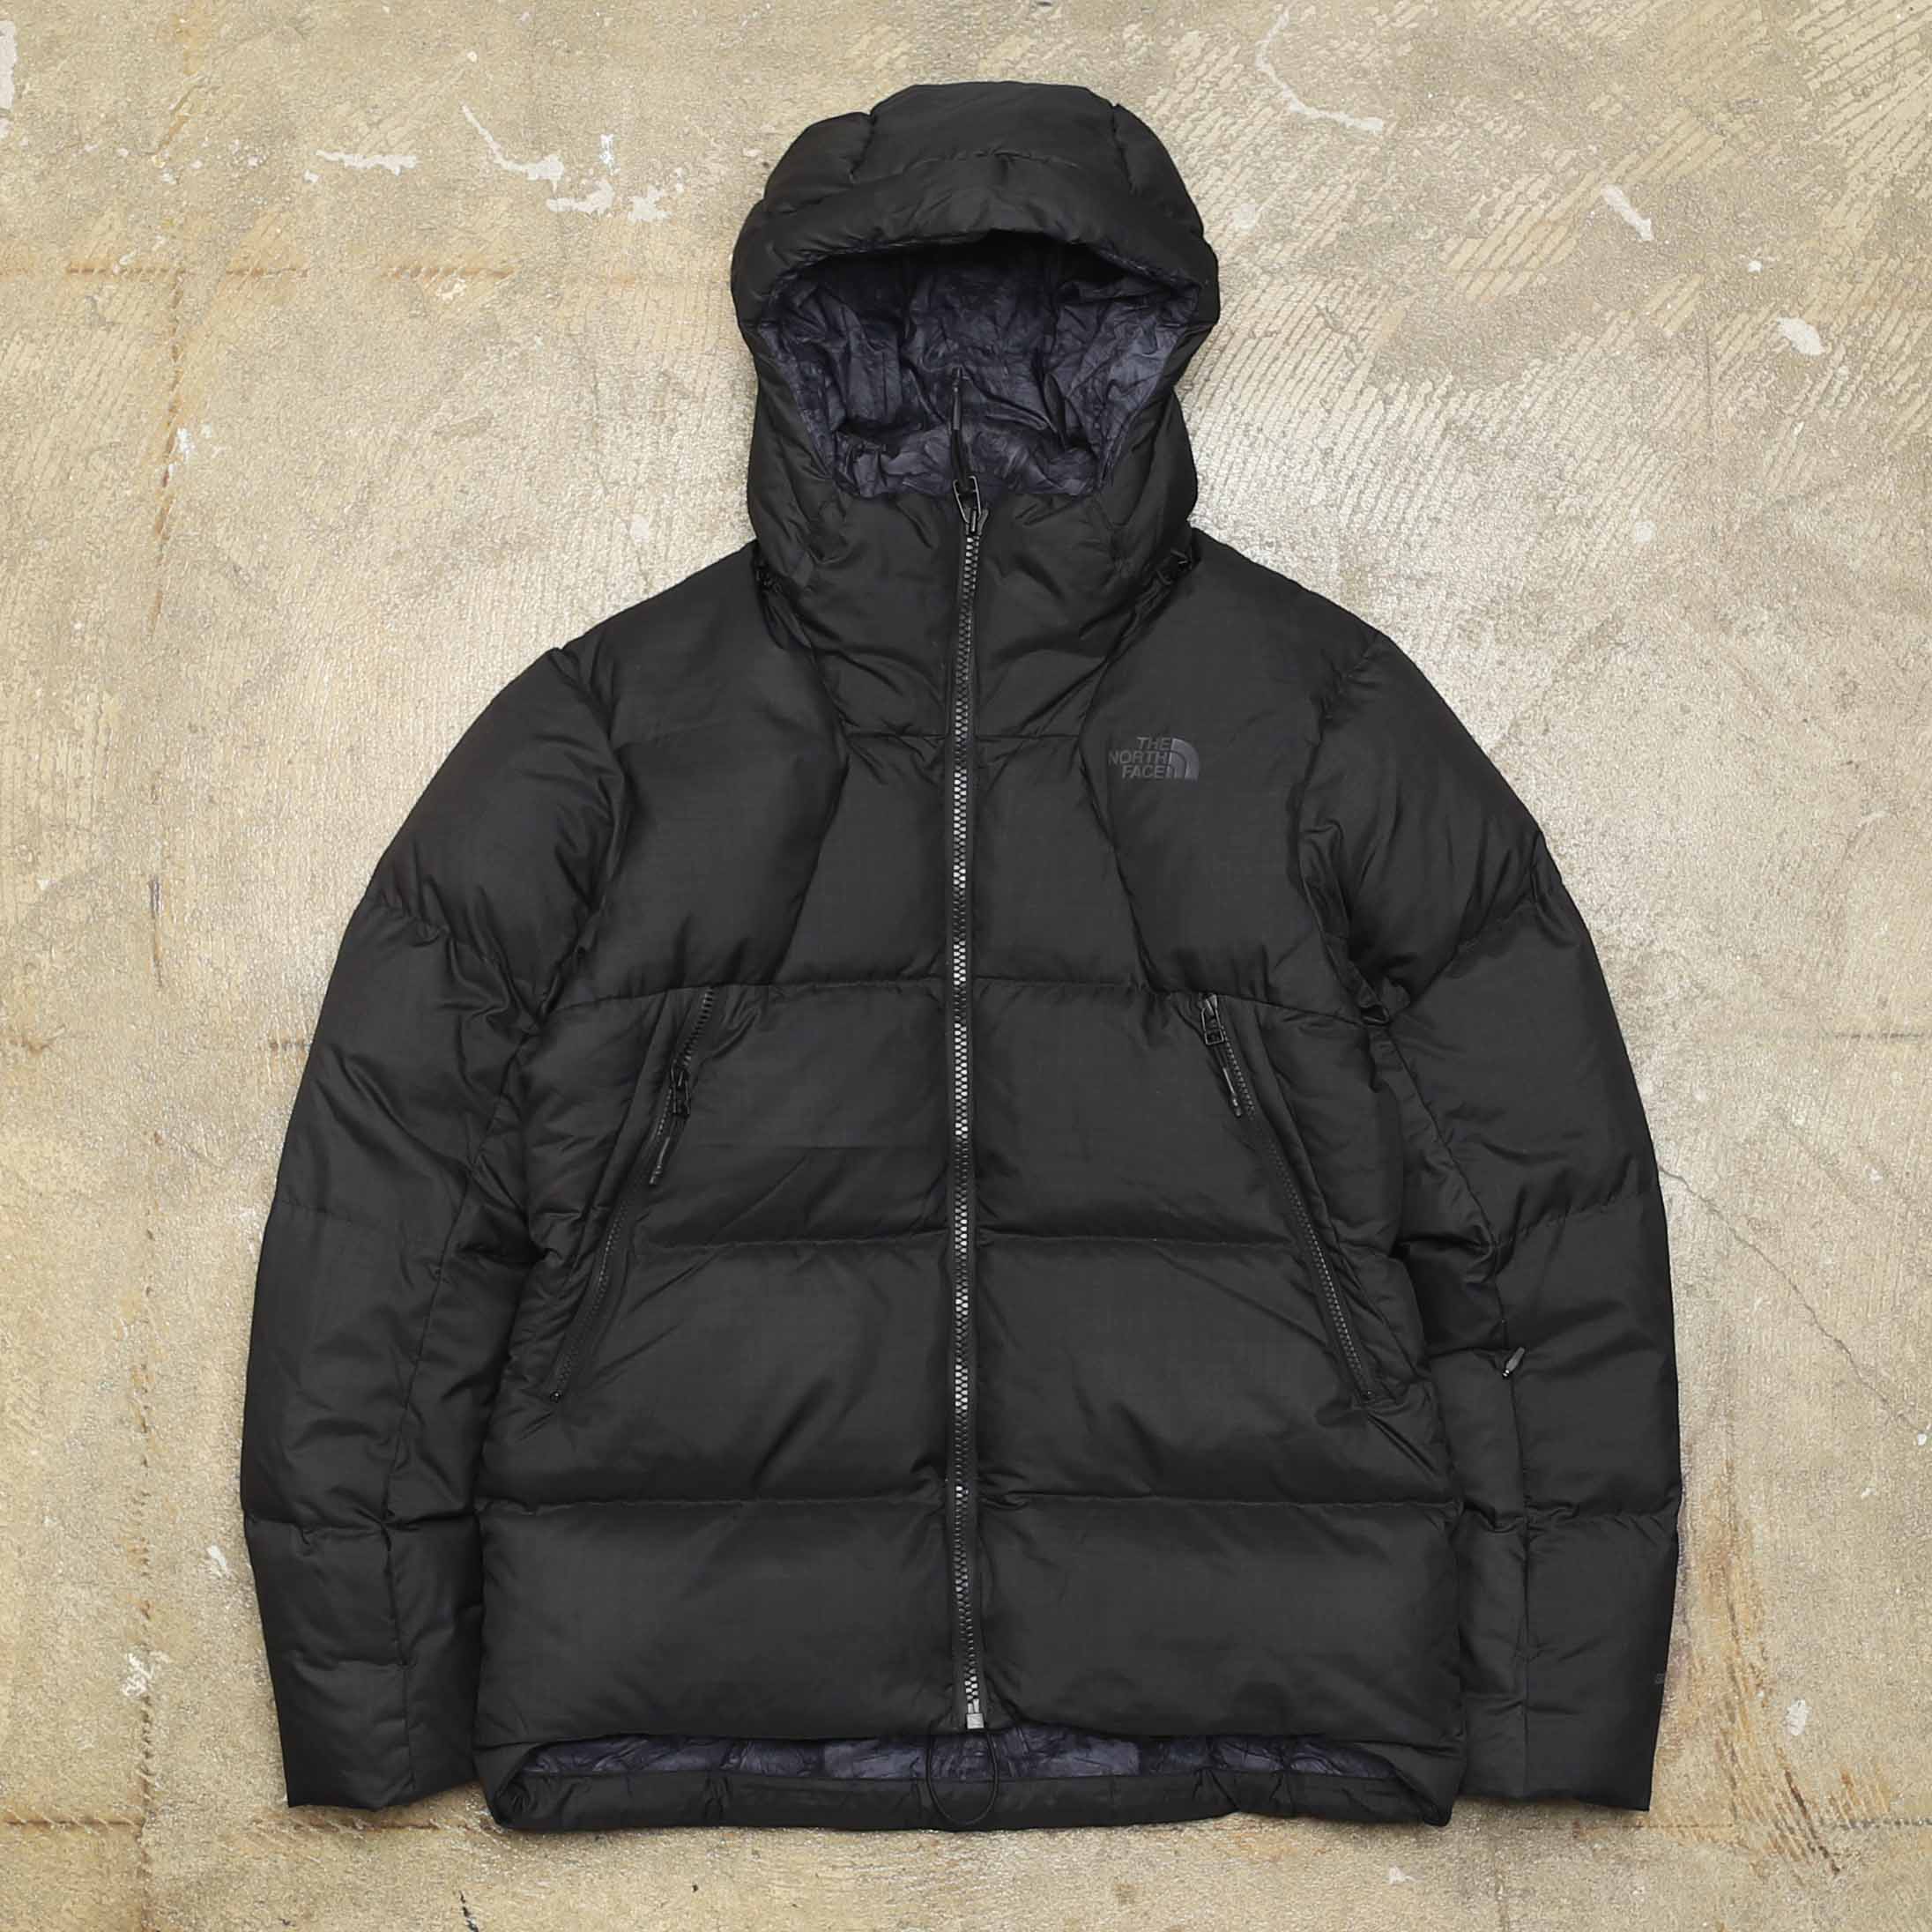 THE NORTH FACE X BARNEYS NEW YORK PUFFER JACKET - BLACK